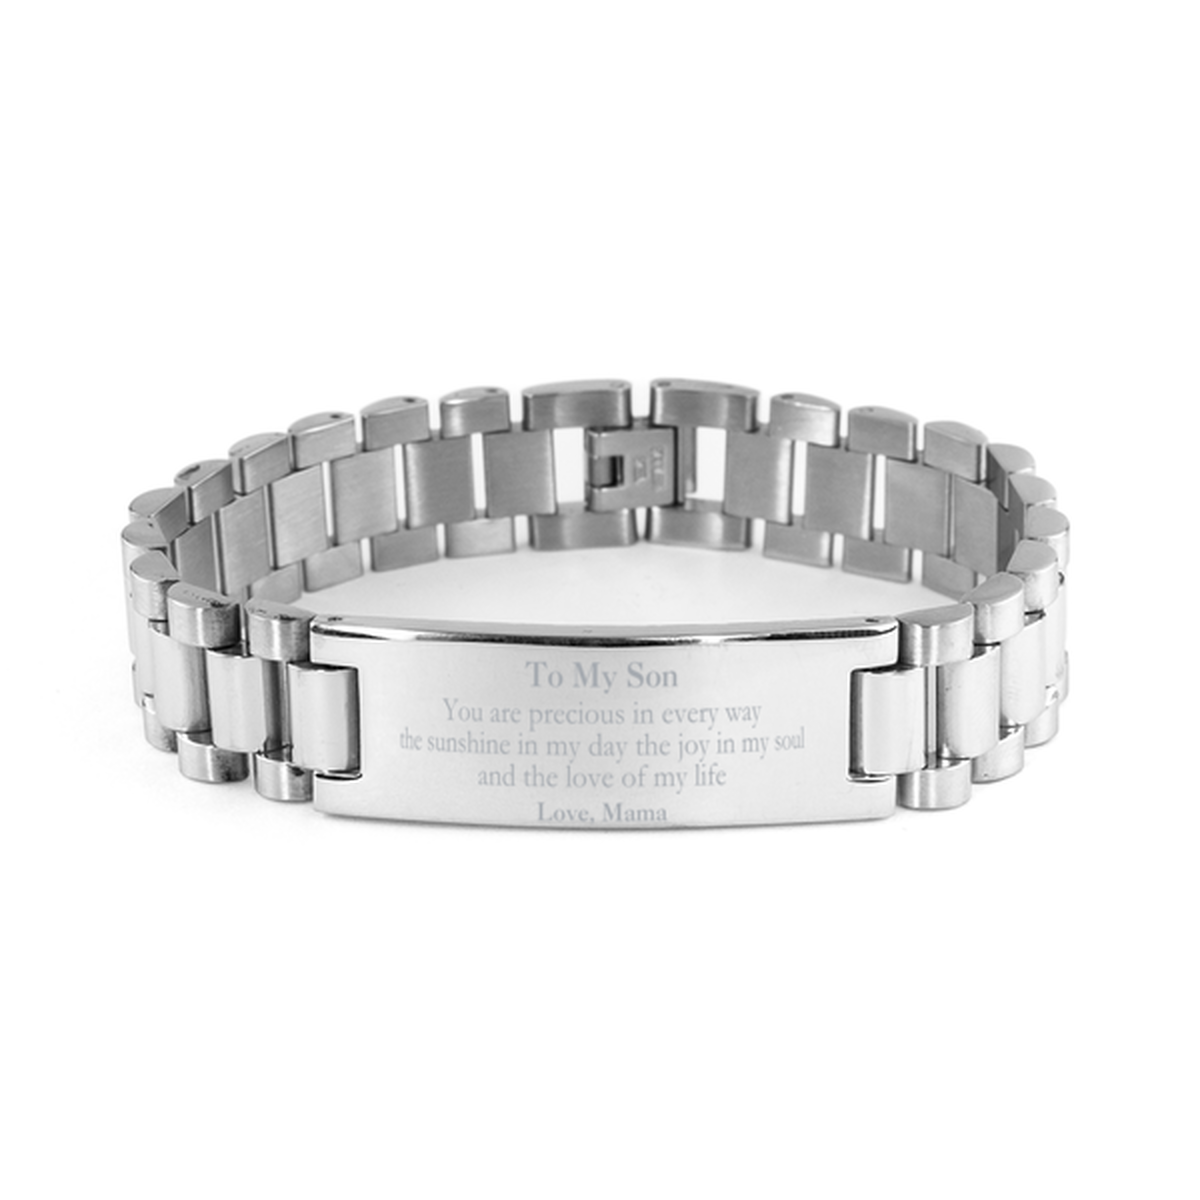 Graduation Gifts for Son Ladder Stainless Steel Bracelet Present from Mama, Christmas Son Birthday Gifts Son You are precious in every way the sunshine in my day. Love, Mama